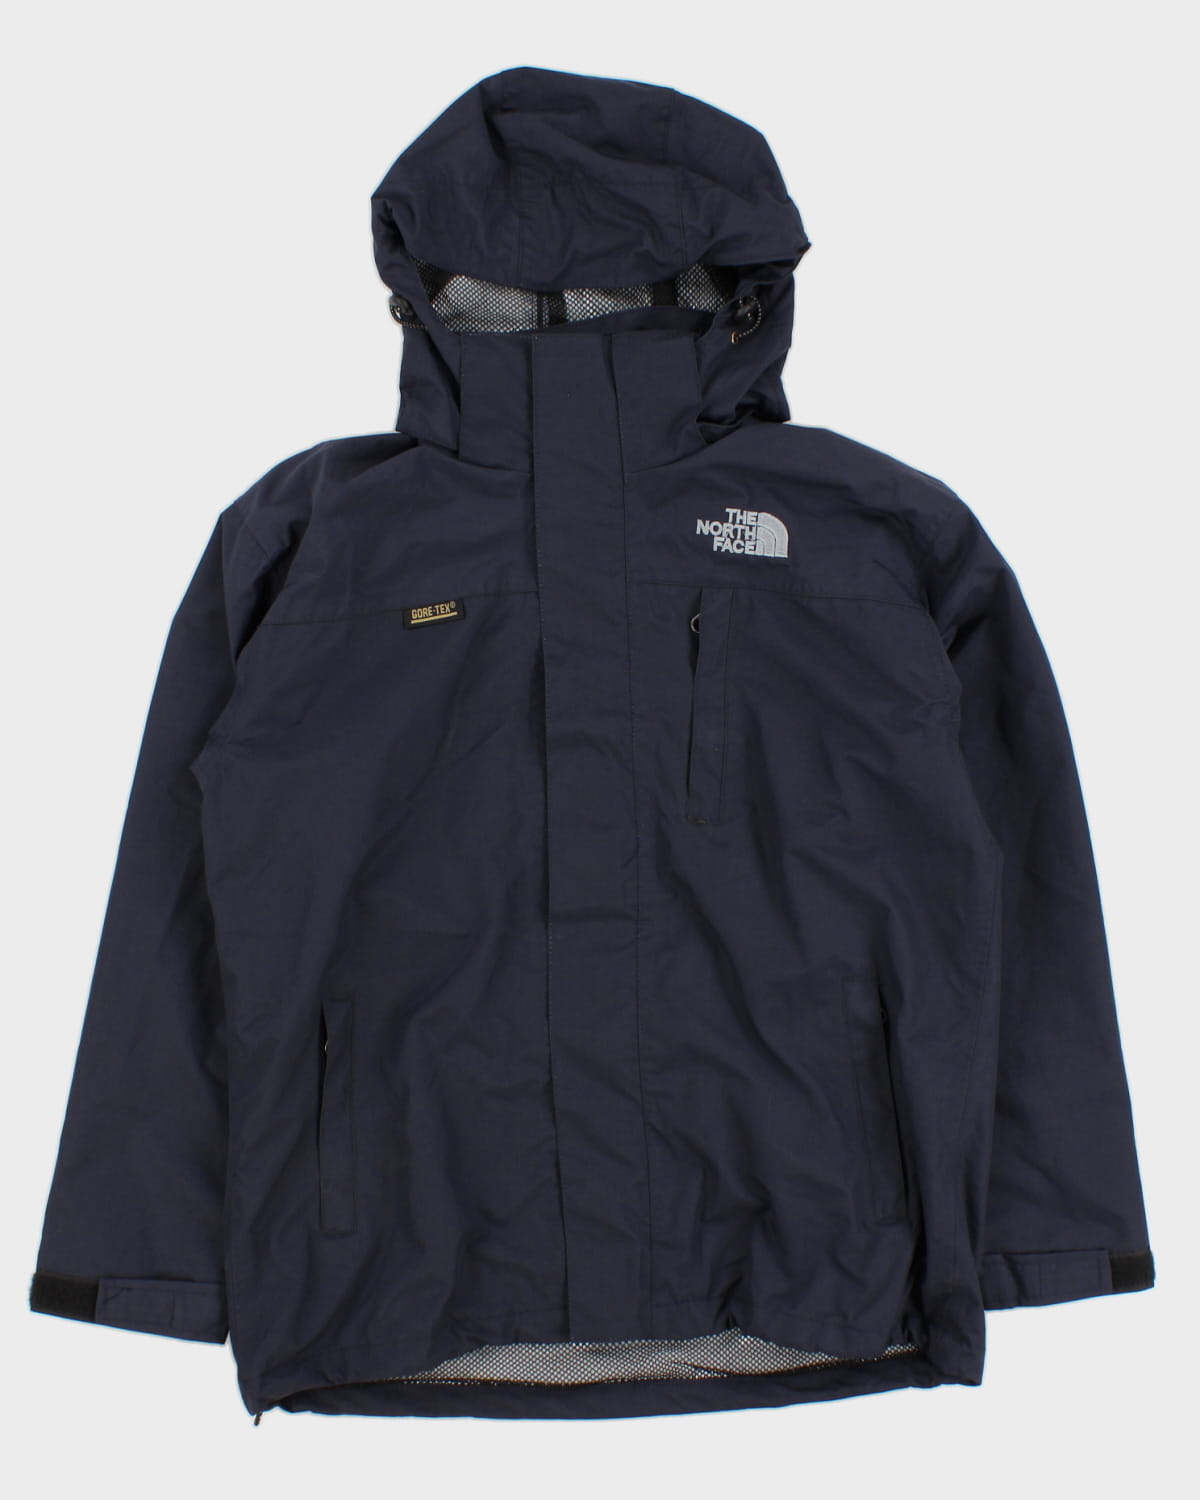 Vintage 90s The North Face Navy Gore-Tex Jacket - S